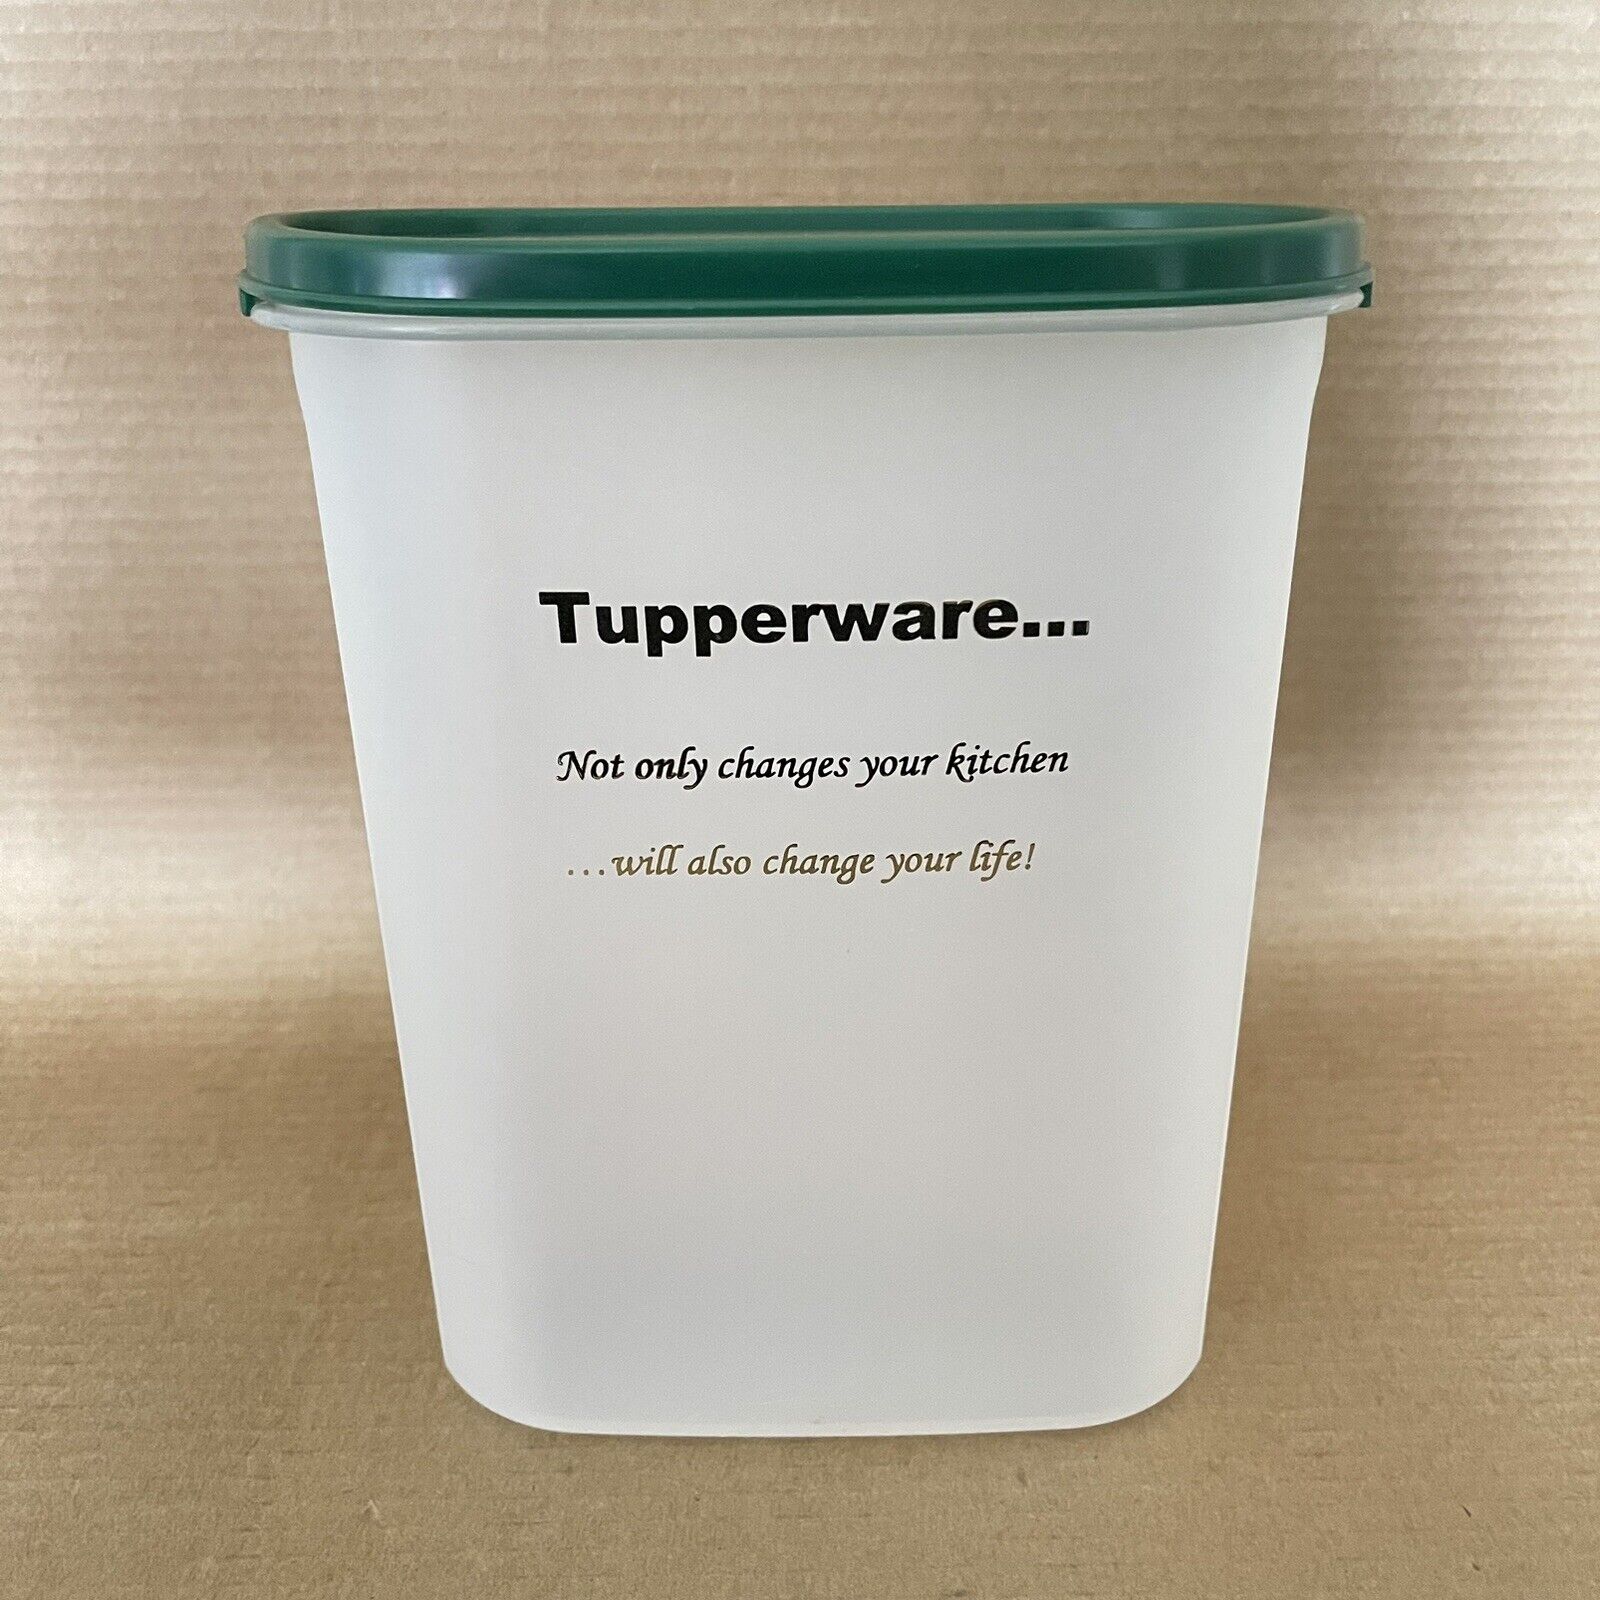 Tupperware Modular Mates Oval #4 Logo Container #1614 Consultant Gift Green Seal